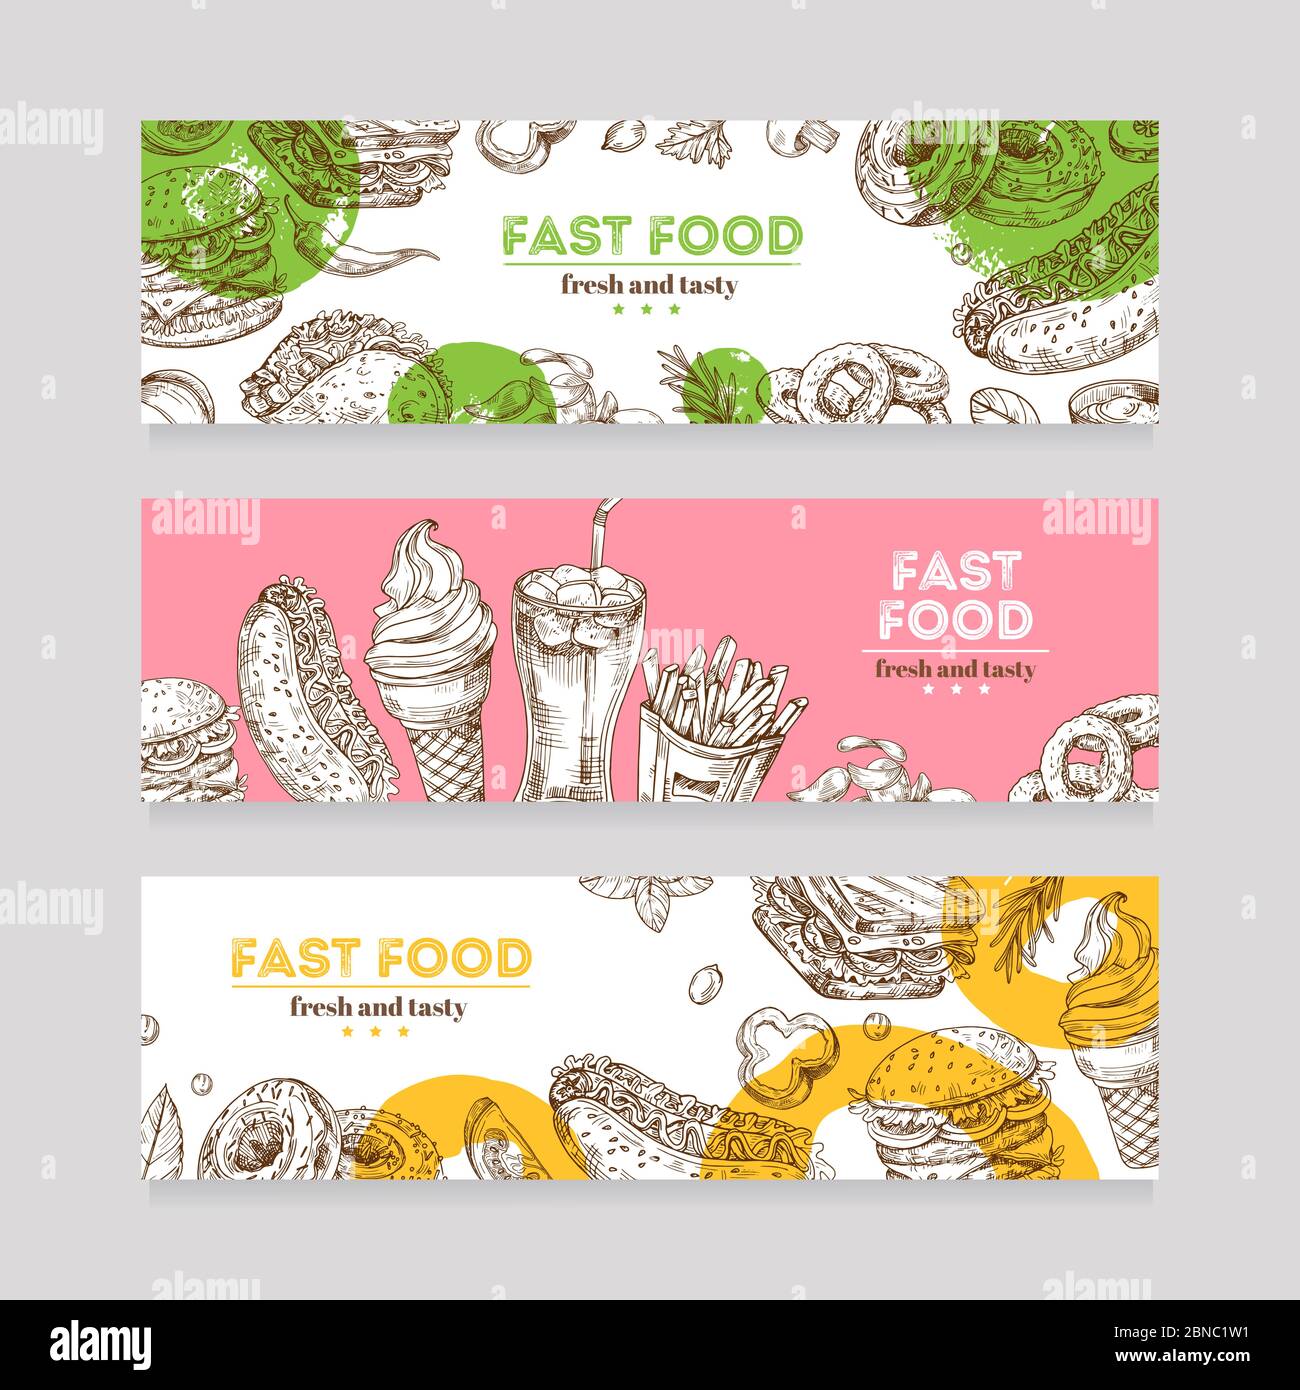 Fast food banners. Sketch burger, pizza, and snack, sandwich, ice cream and chips. Fast food restaurant horizontal advertising banners. Fast food hamburger, pizza lunch illustration Stock Vector